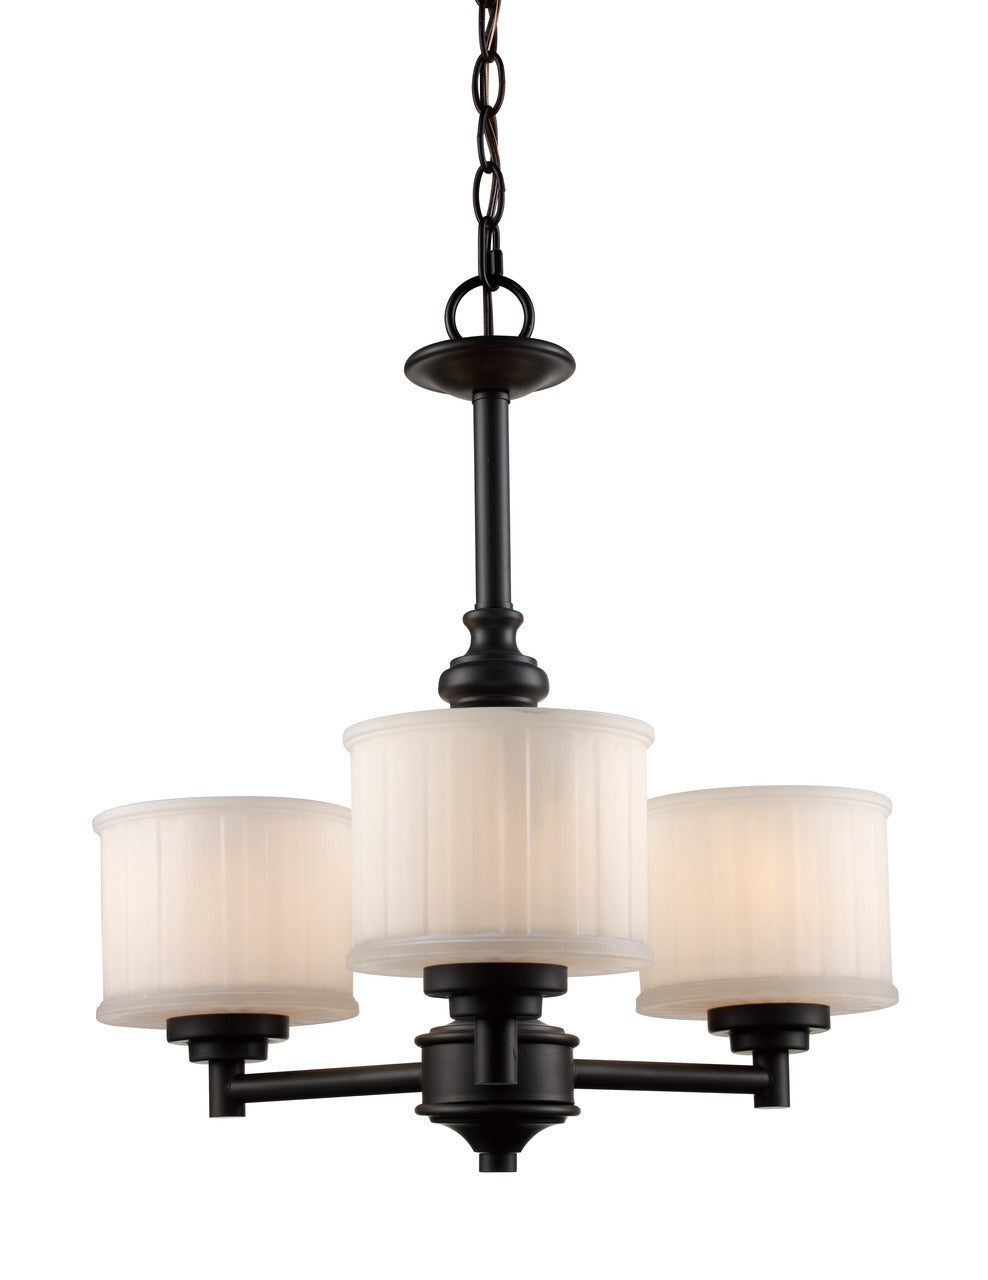 Trans Globe Lighting 70726 ROB 19.5" Indoor Rubbed Oil Bronze Transitional Chandelier